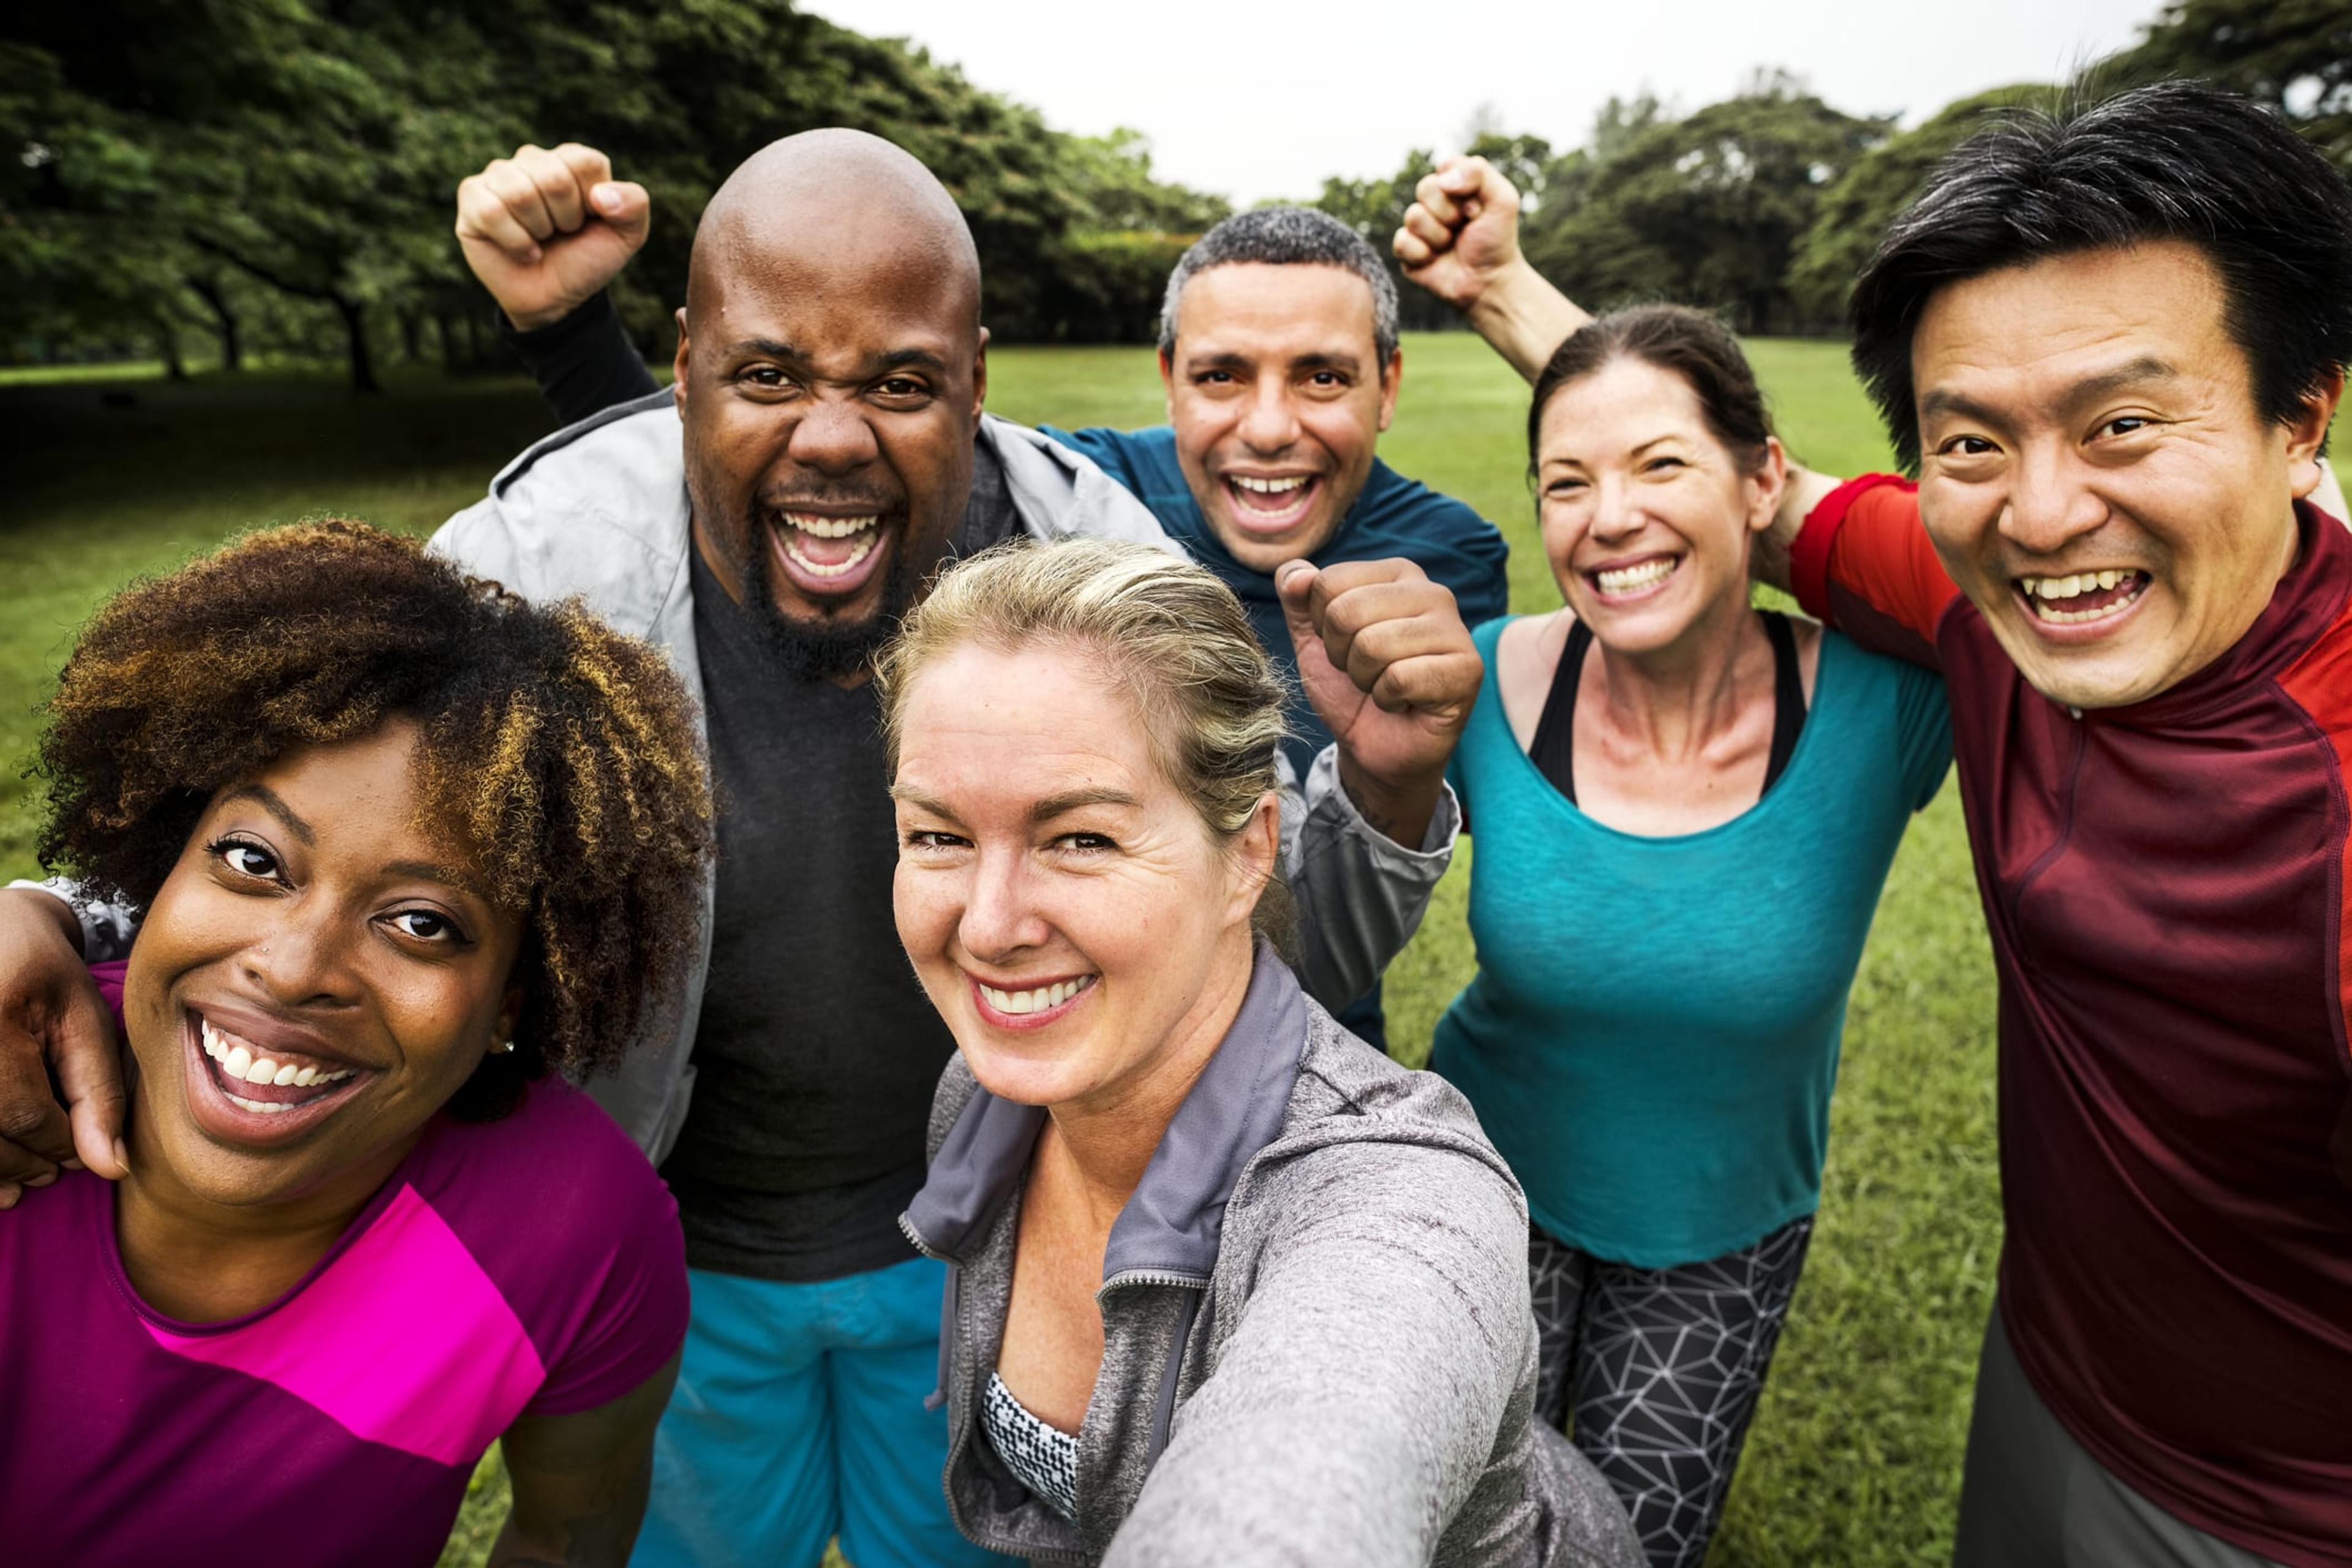 Group of people taking a selfie after a workout in the park.